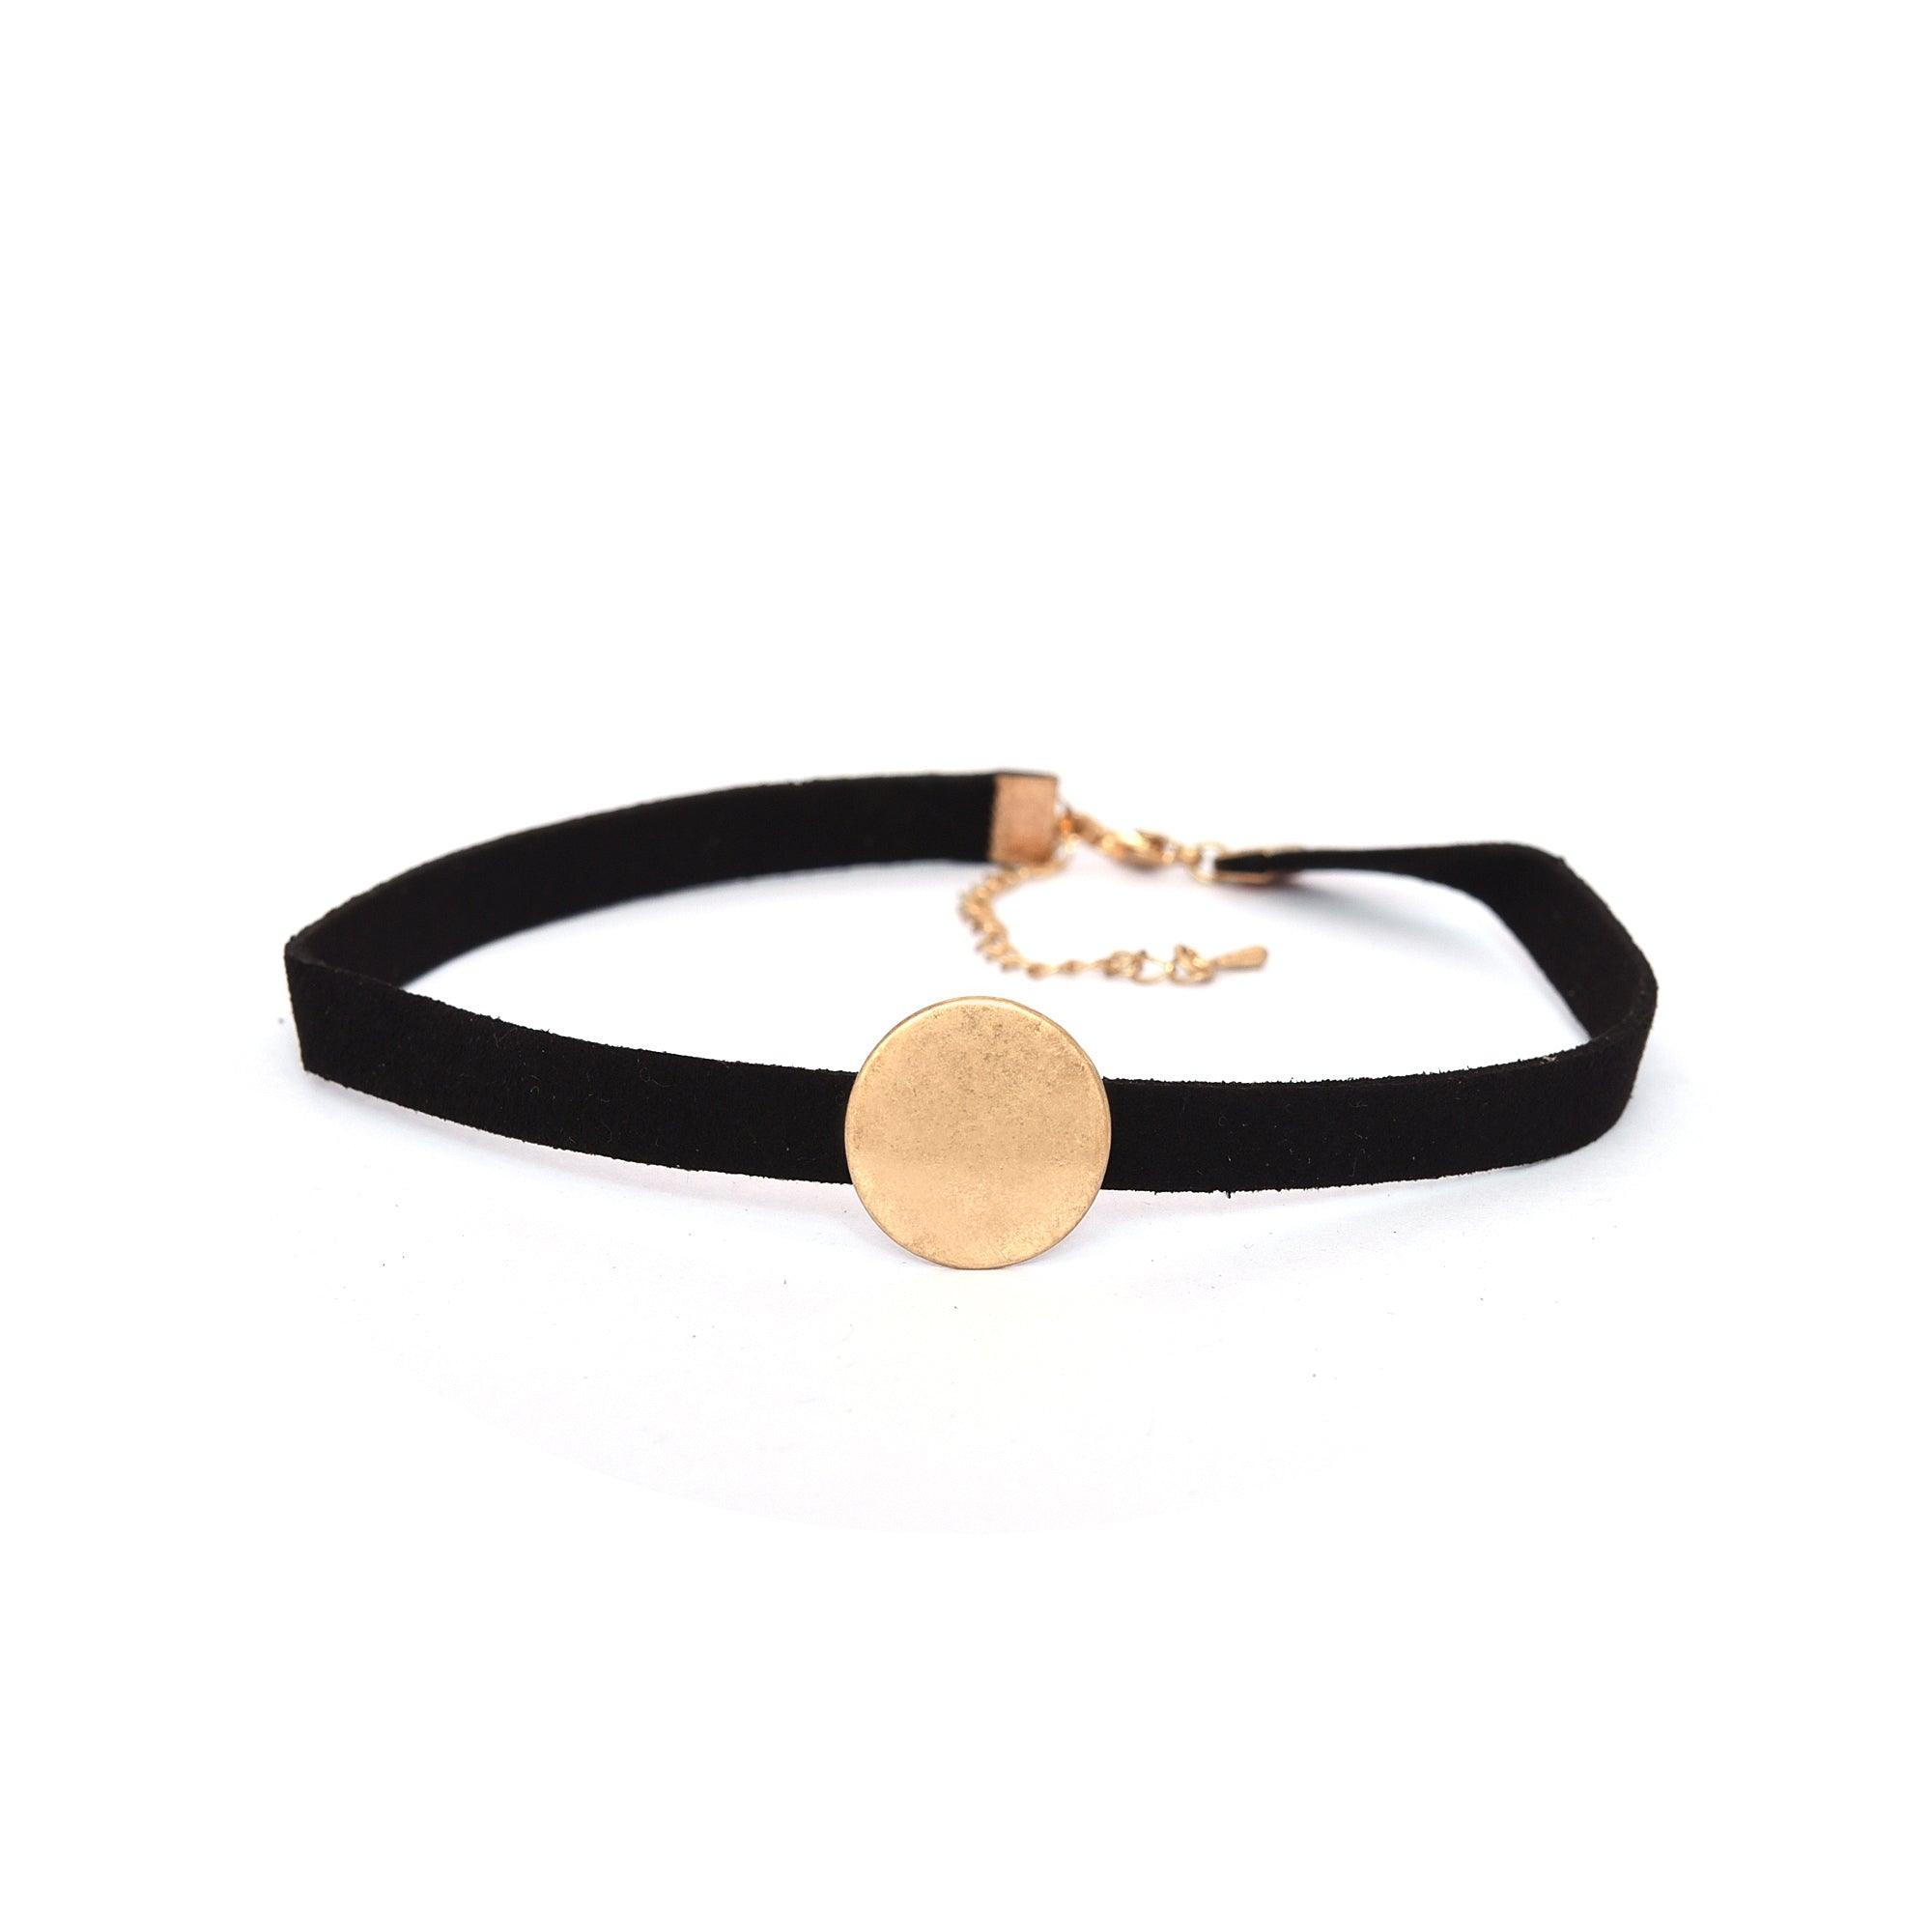 Trendy leather choker necklace free shipping - The Fineworld